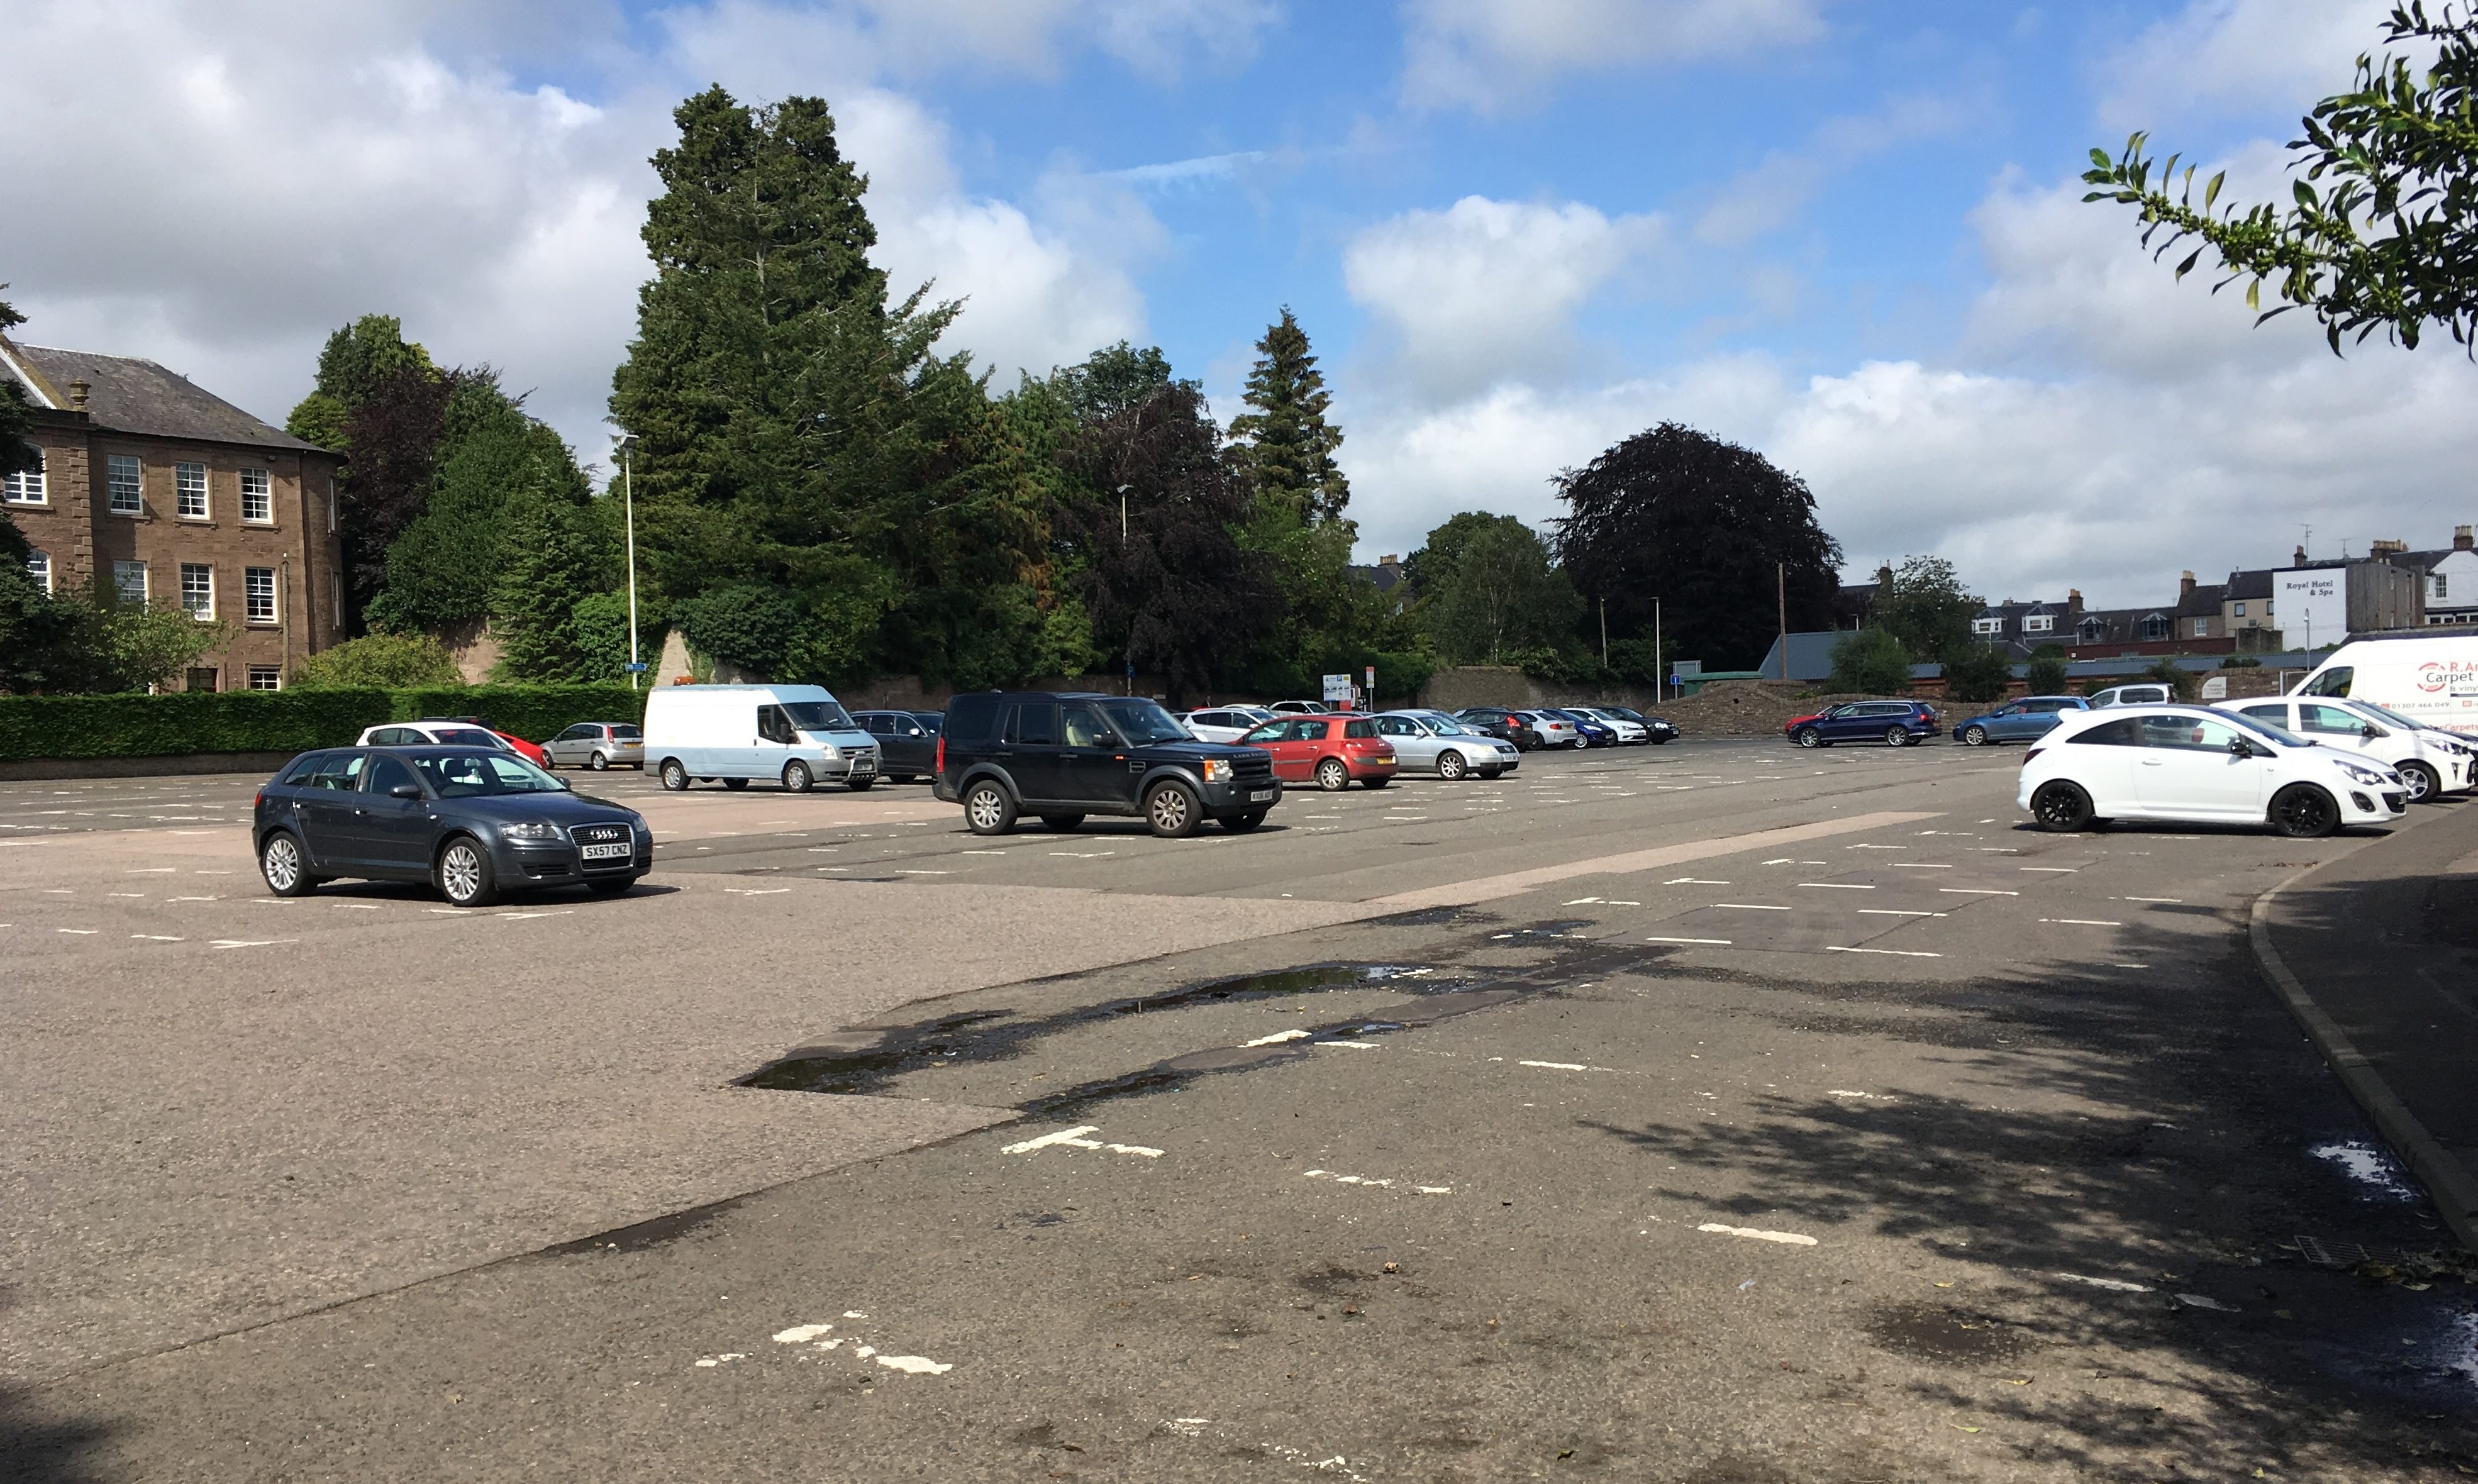 Forfar's Myre Car Park is one of the testing sites in Angus.